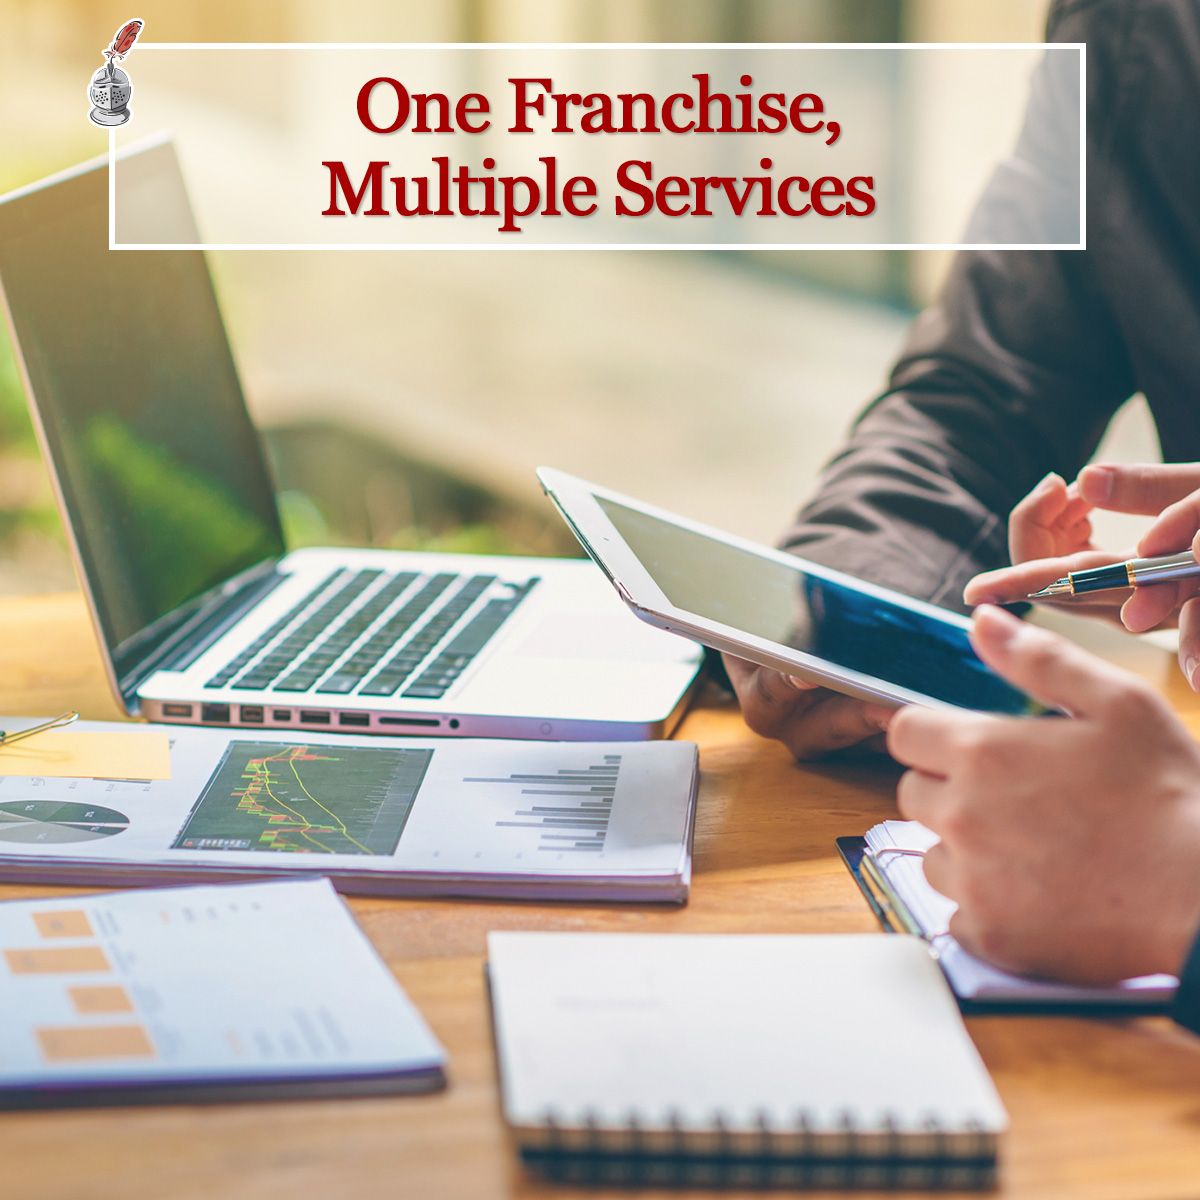 One Franchise, Multiple Services